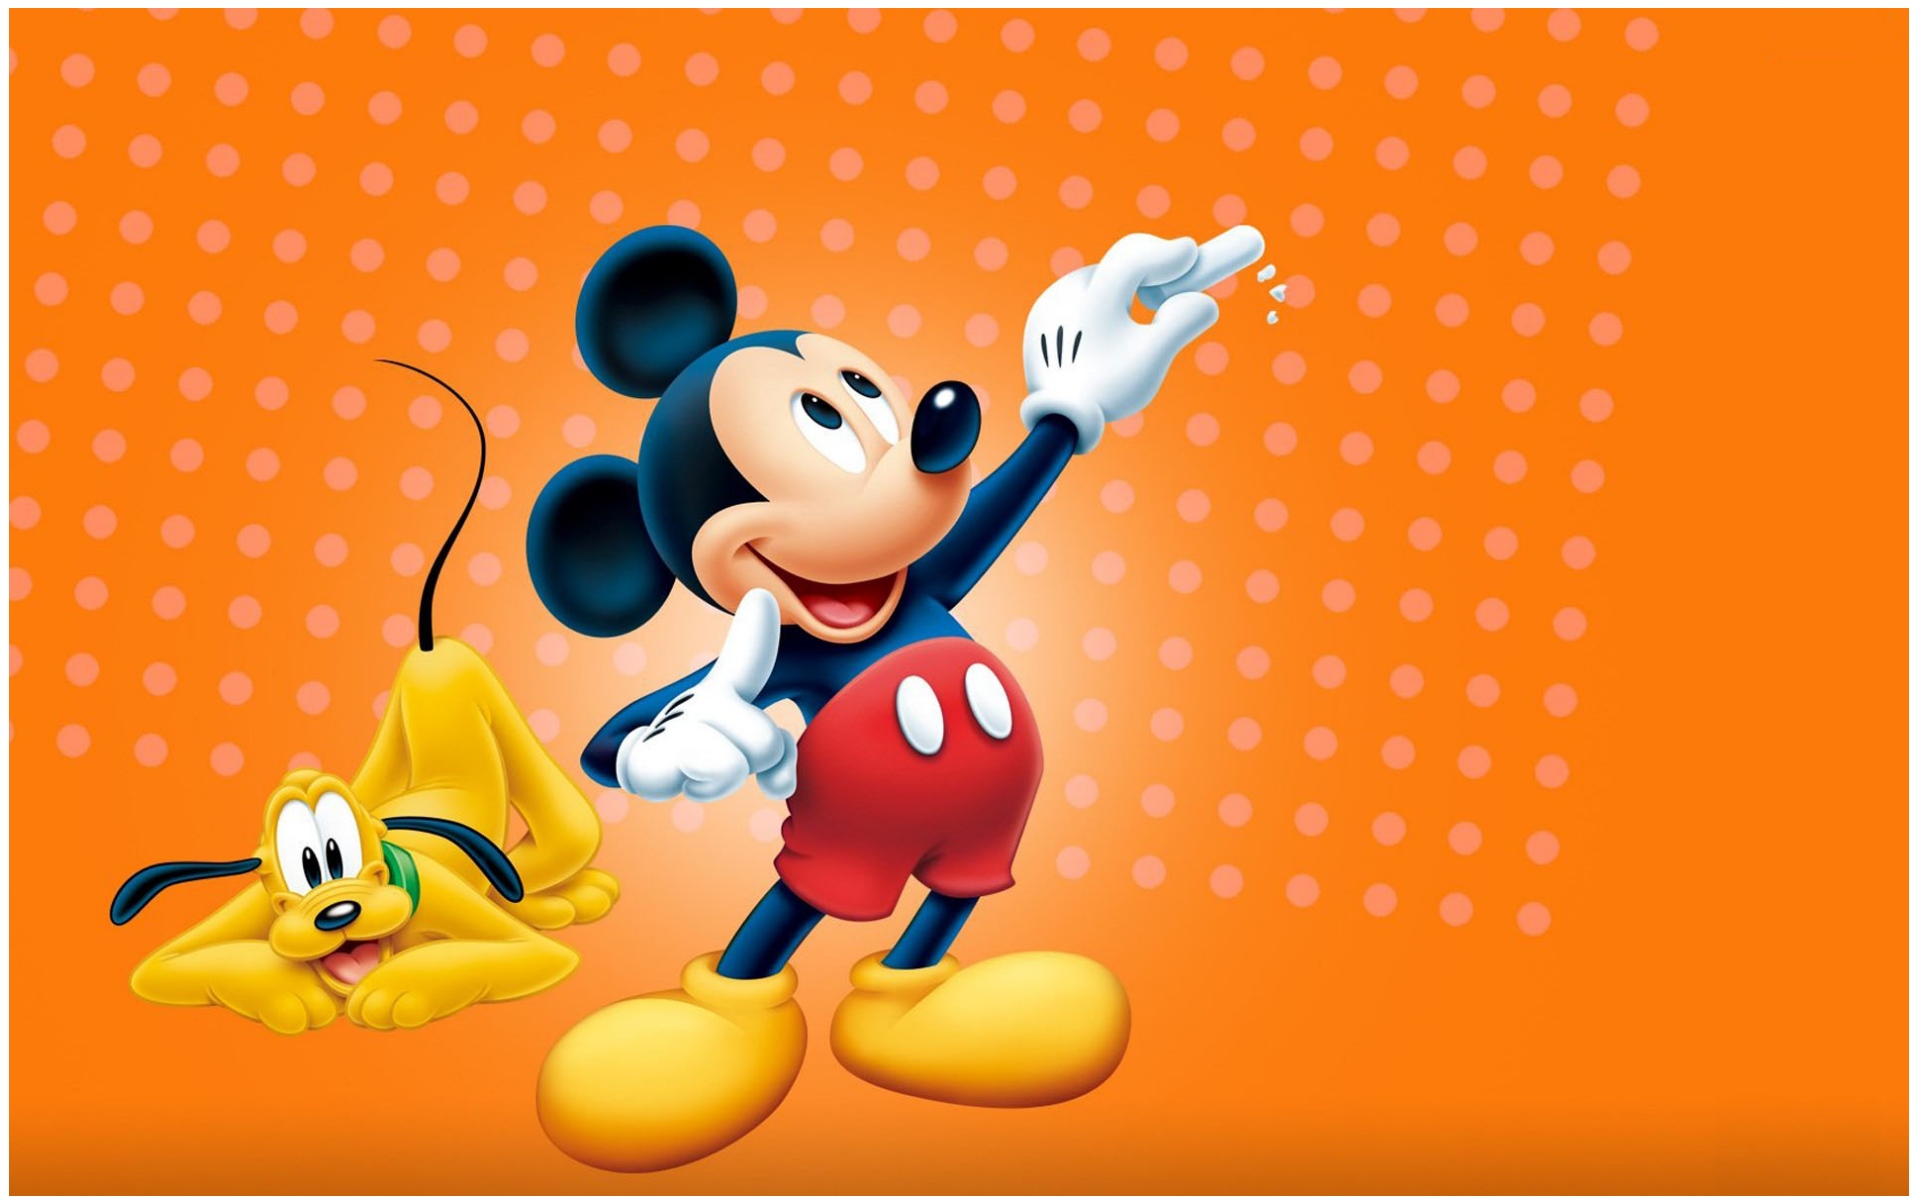 Mickey mouse cartoons hd wallpapers download